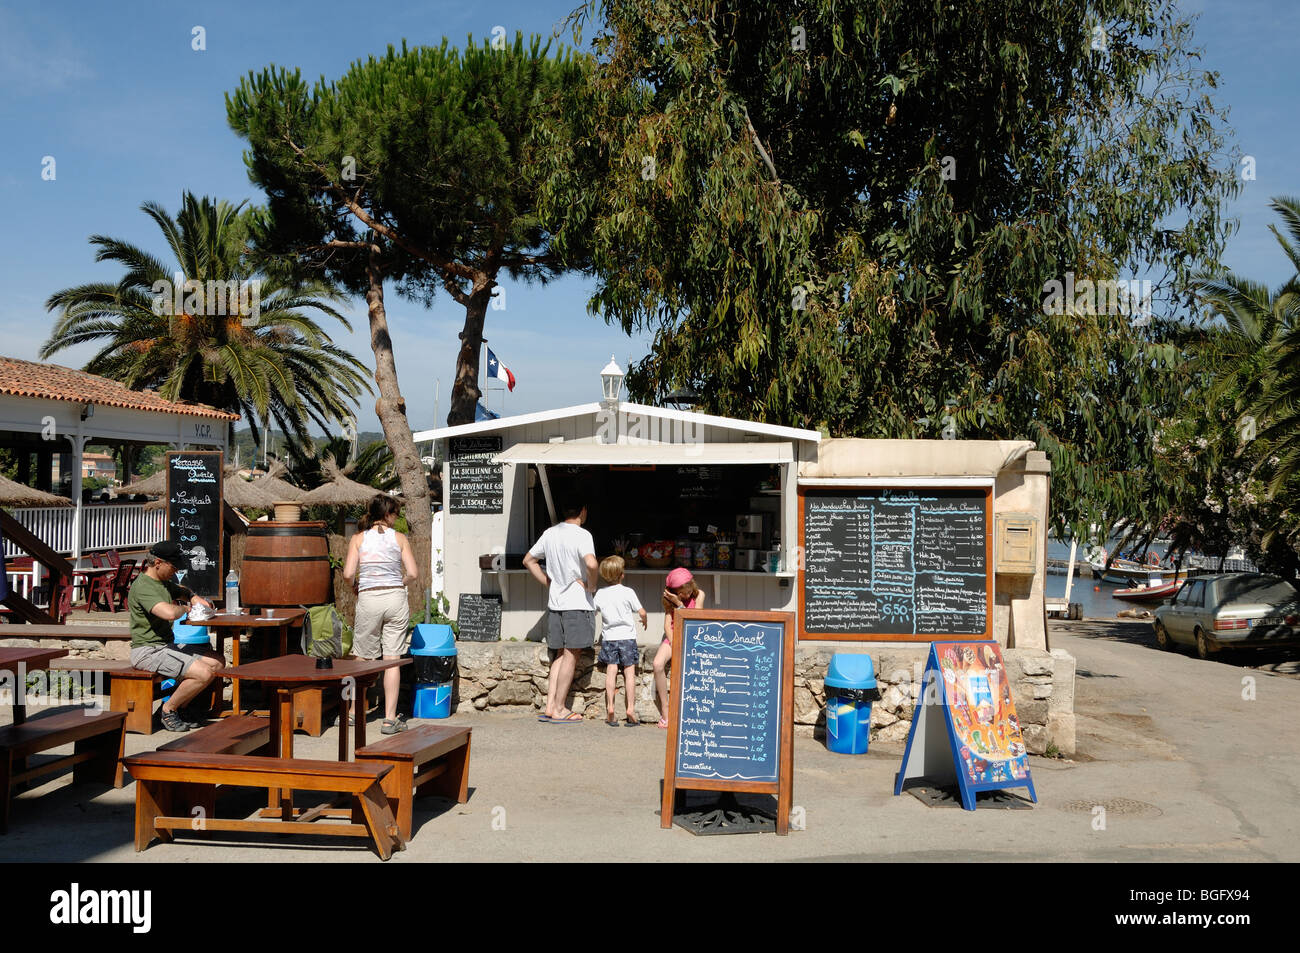 Tourists Queuing at a Snack Bar in the Port Town of Porquerolles Island, Îles Hyères, Var, Côte d'Azur, French Riviera, France Stock Photo